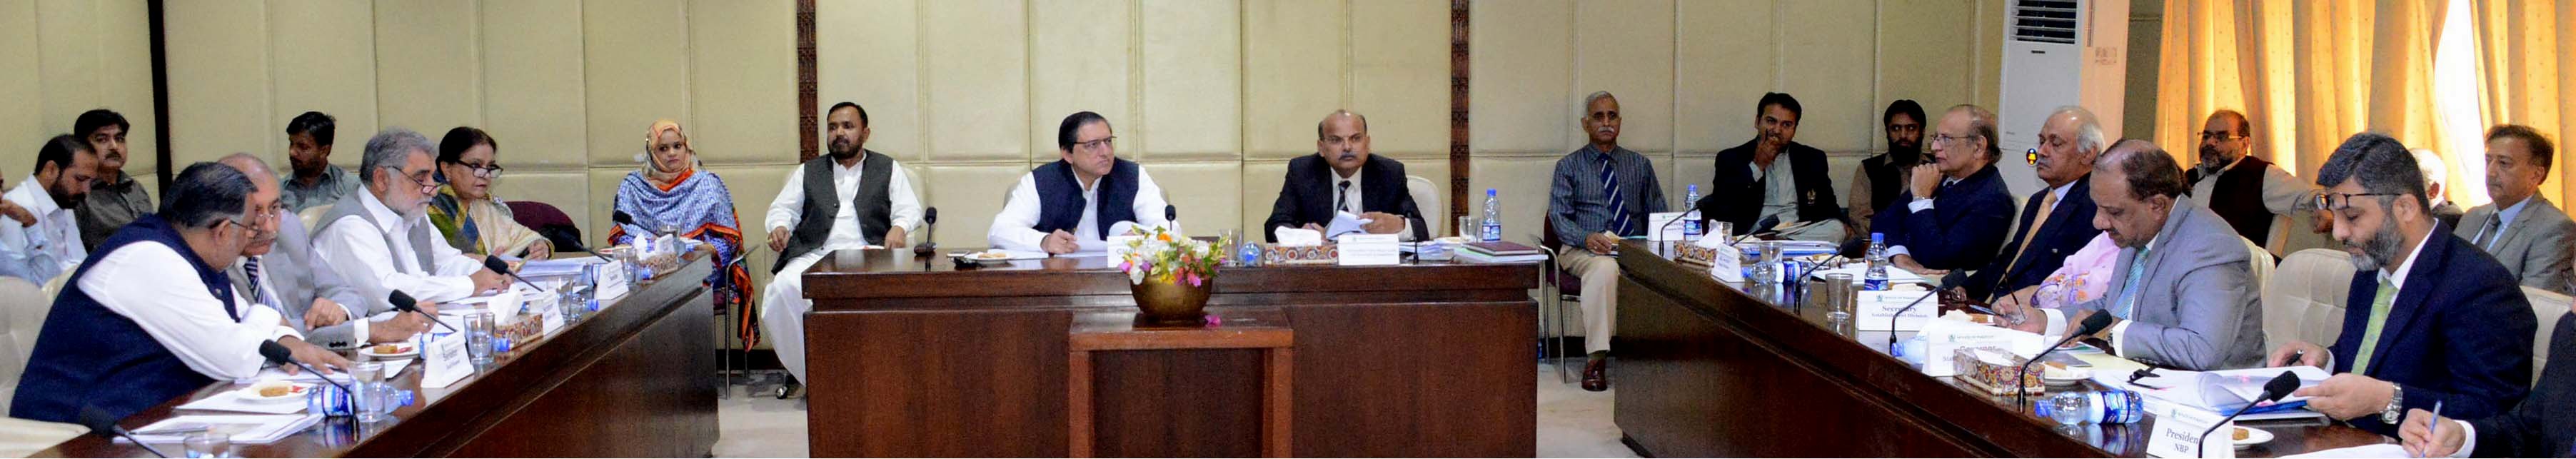 SENATOR SALEEM MANDVIWALLA, CHAIRMAN SENATE STANDING COMMITTEE ON FINANCE, REVENUE, ECONOMIC AFFAIRS, STATISTICS AND PRIVATIZATION PRESIDING OVER A MEETING OF THE COMMITTEE AT PARLIAMENT HOUSE ISLAMABAD ON OCTOBER 04, 2017.